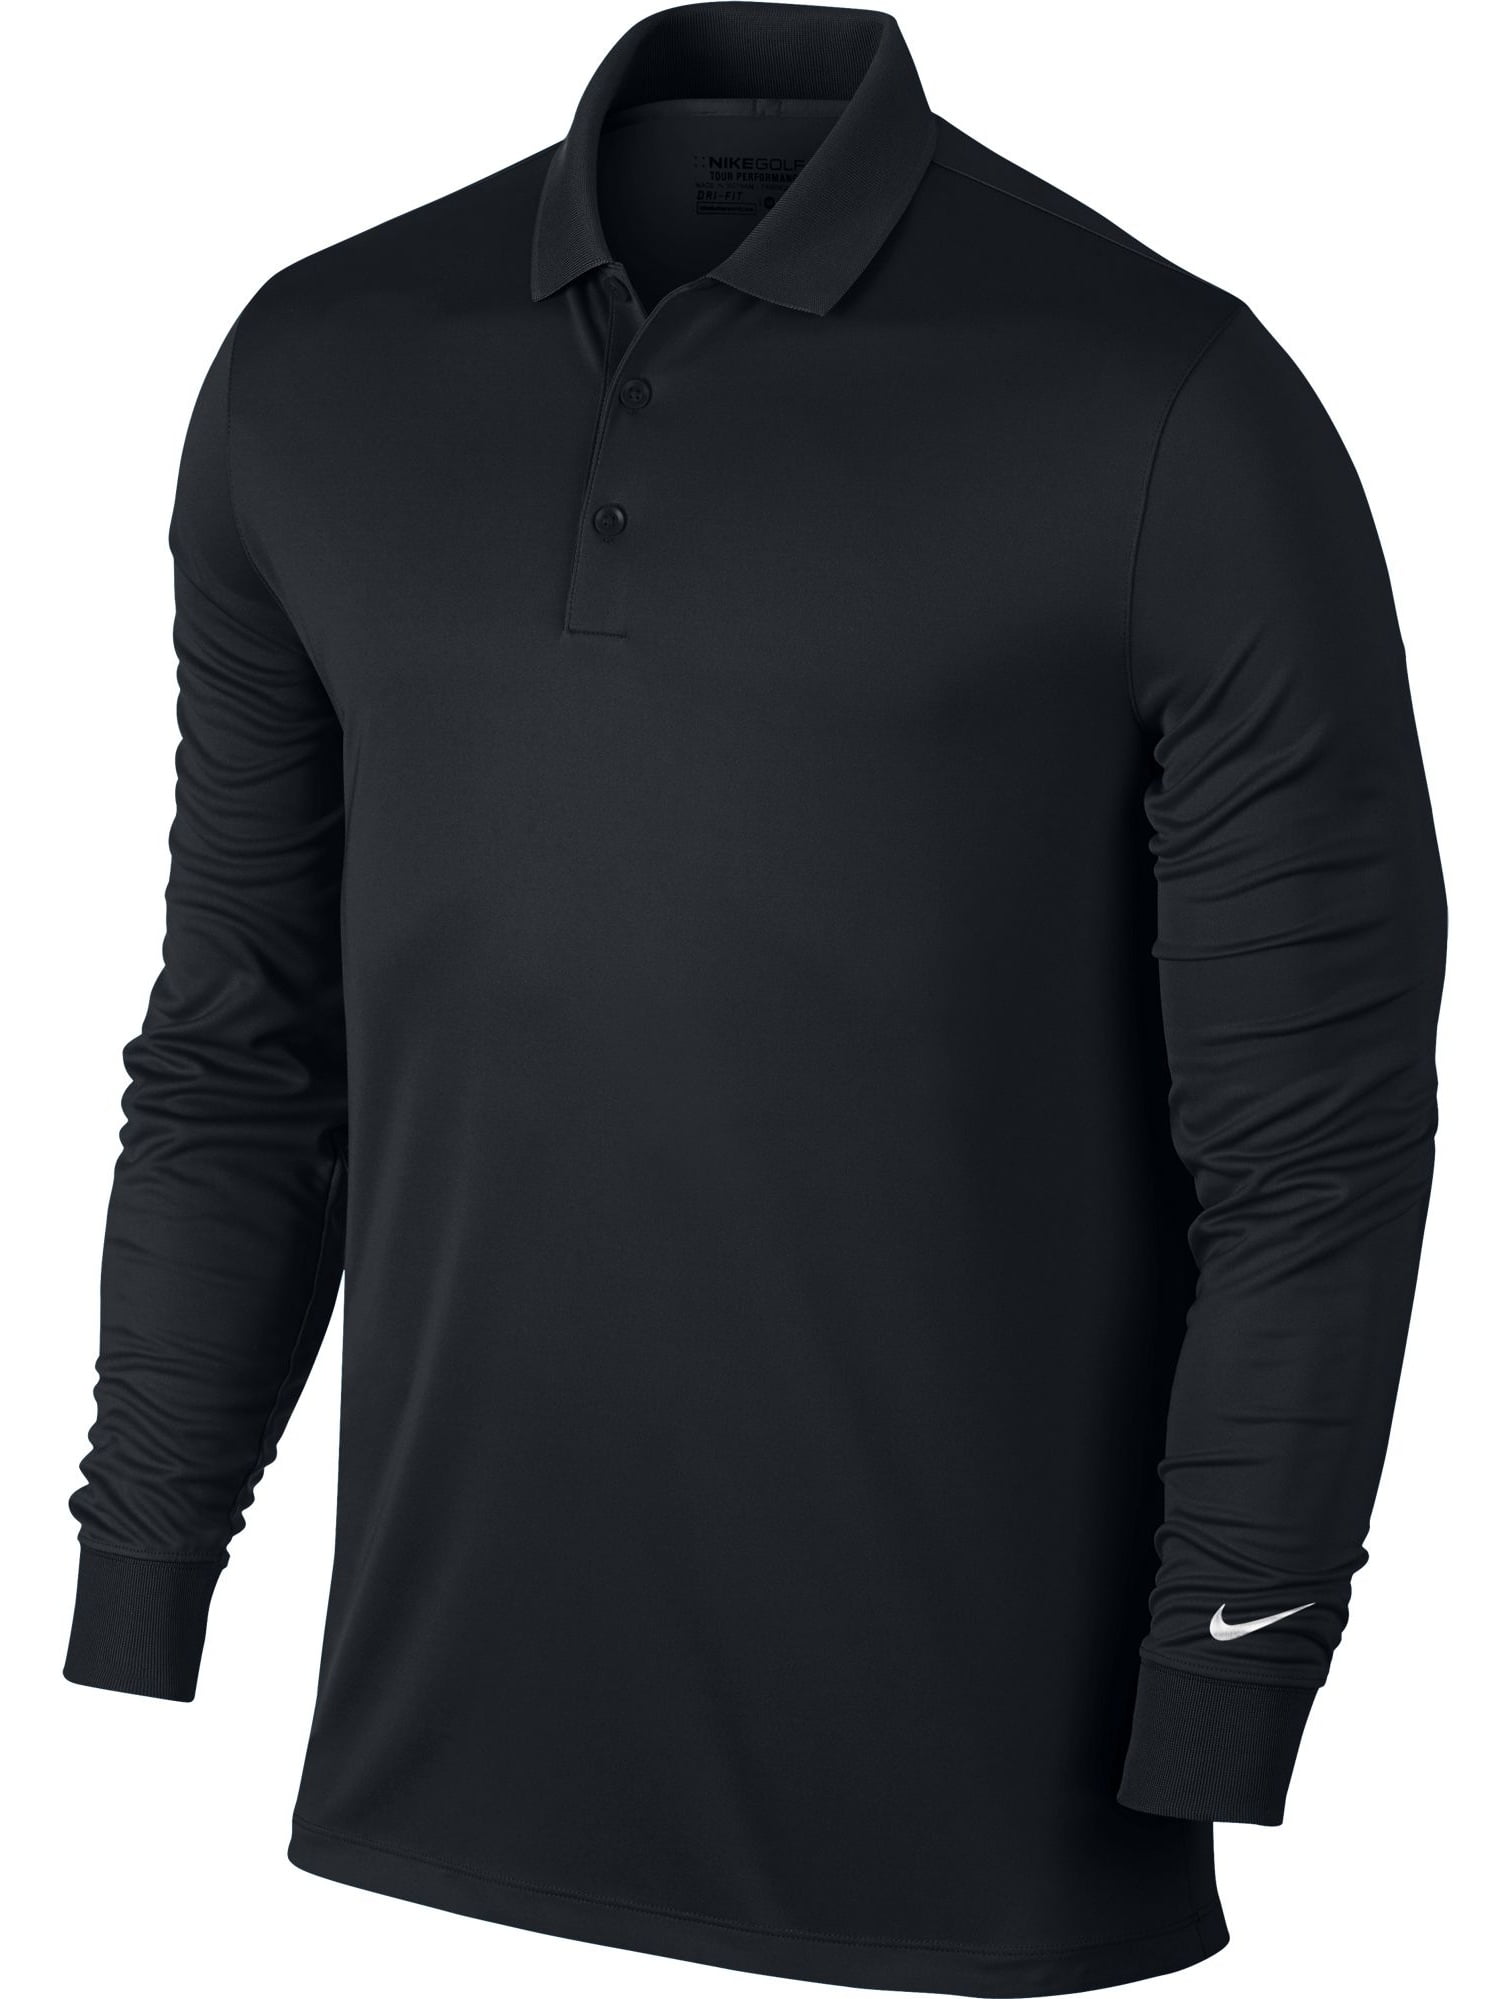 NEW Nike Victory Solid Long Sleeve Dri-Fit Polo Black/White Large Shirt ...